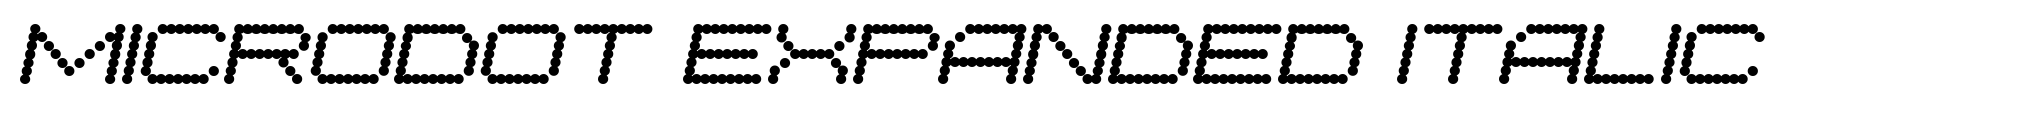 Microdot Expanded Italic image